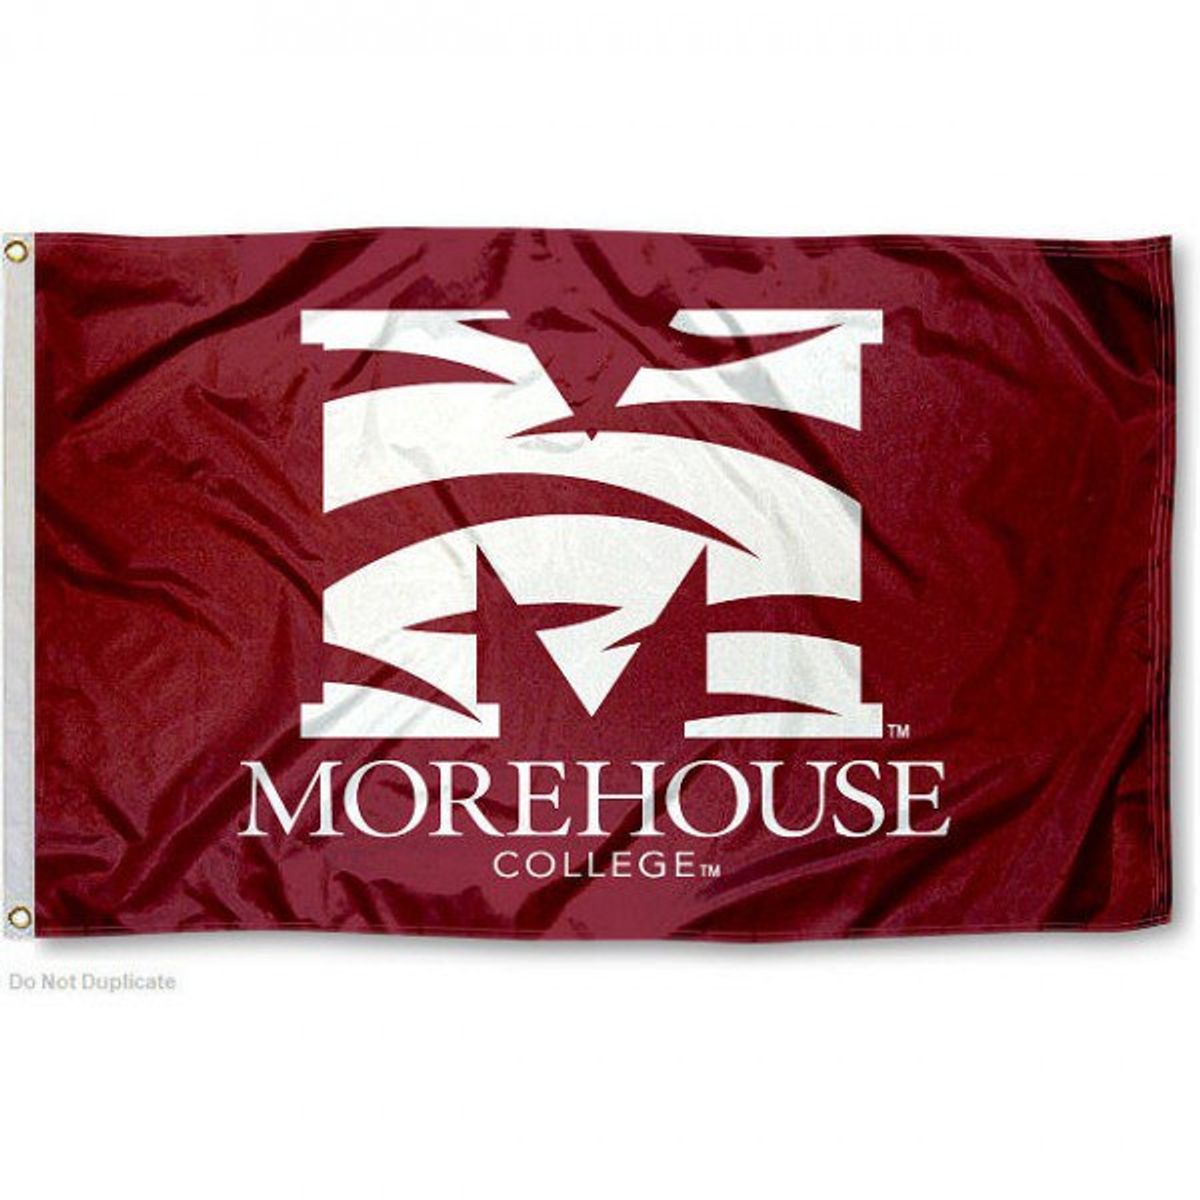 What Morehouse Has Done For Me